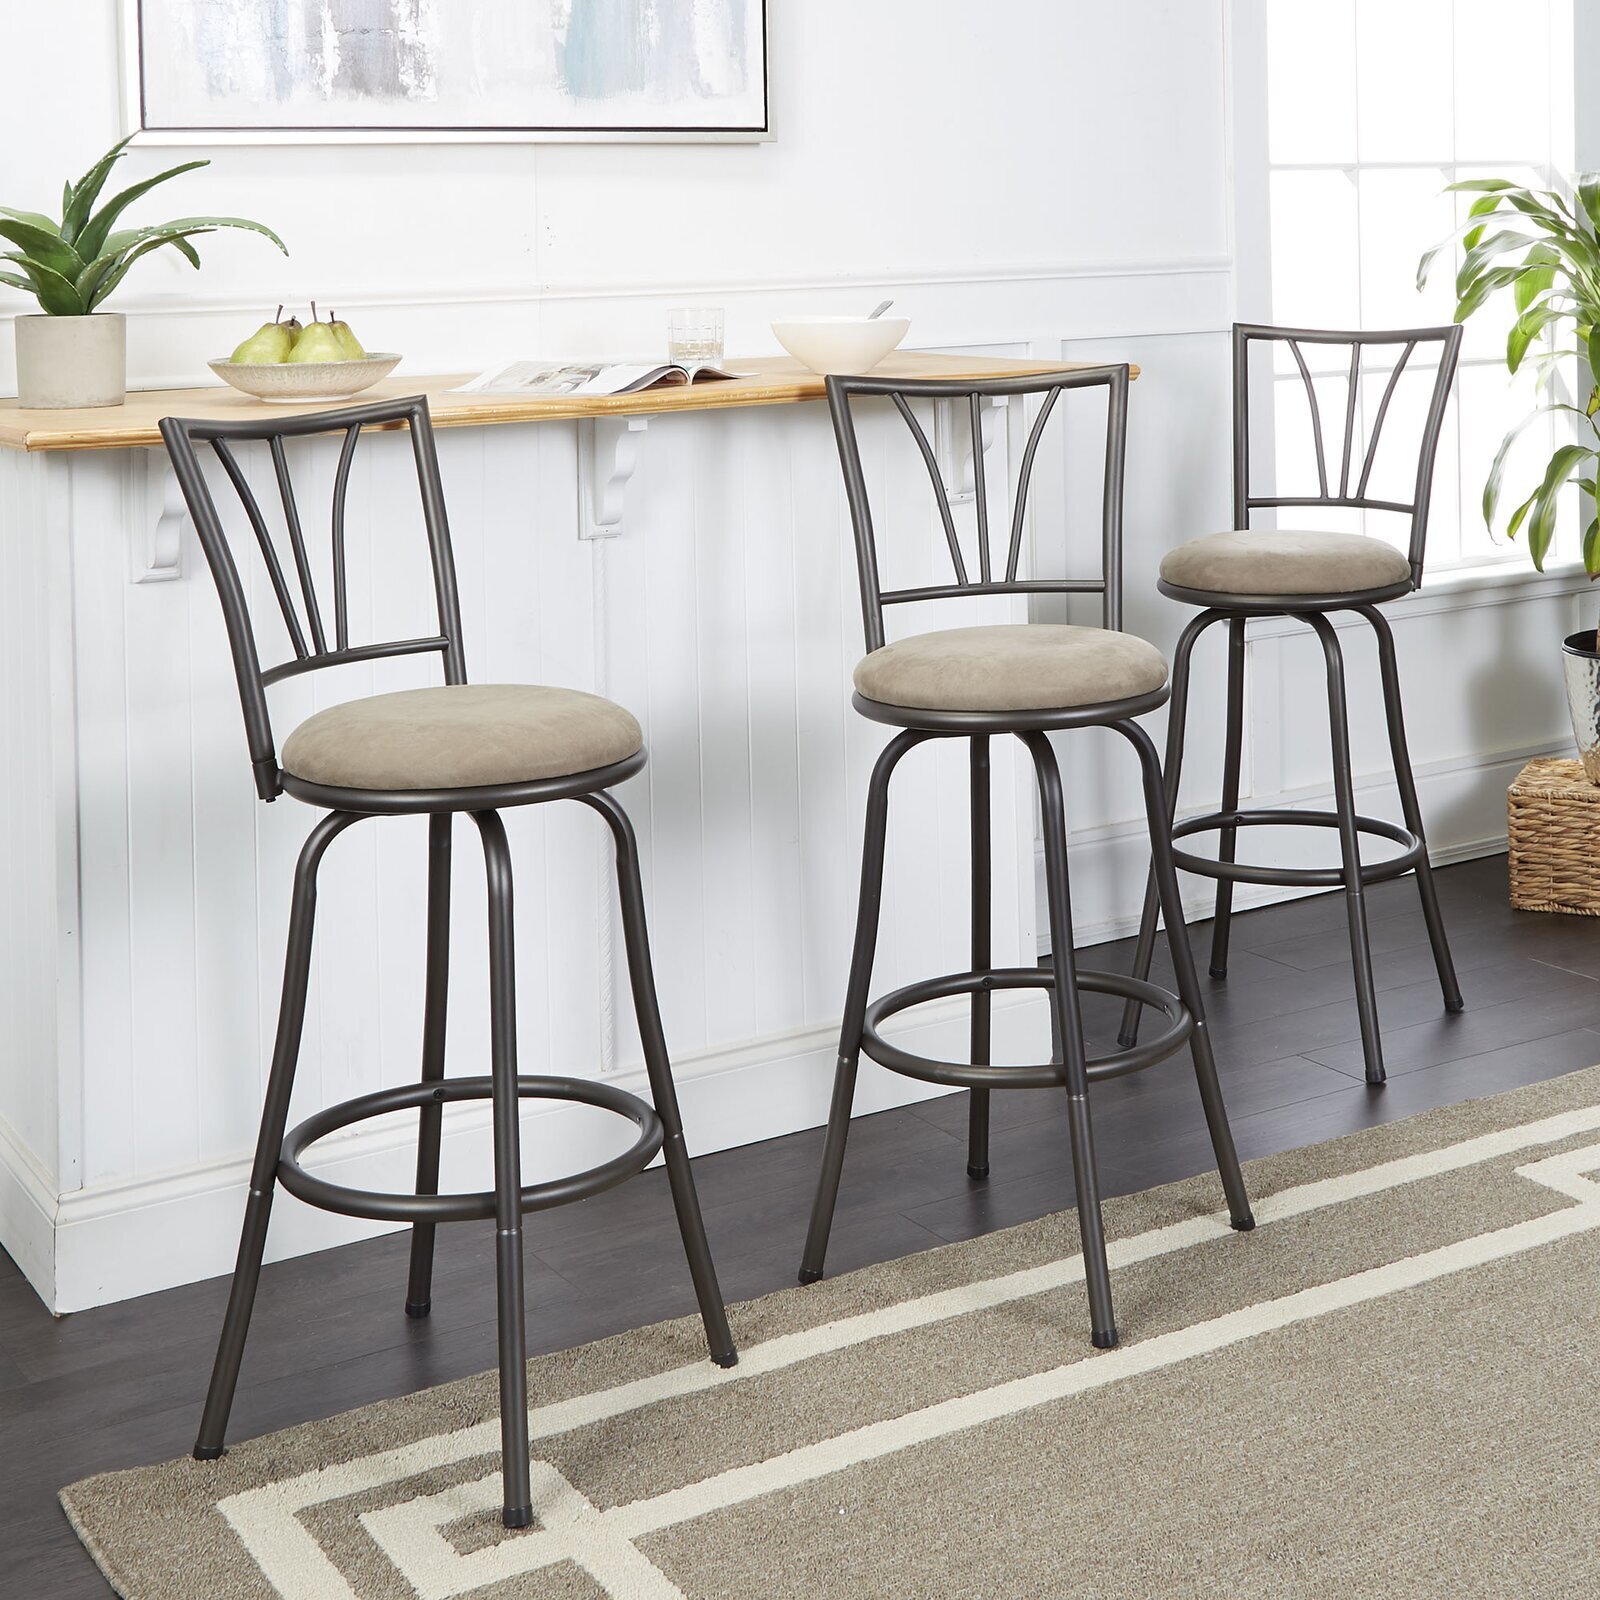 Extra tall bar stools 36 inch seat height with footrest